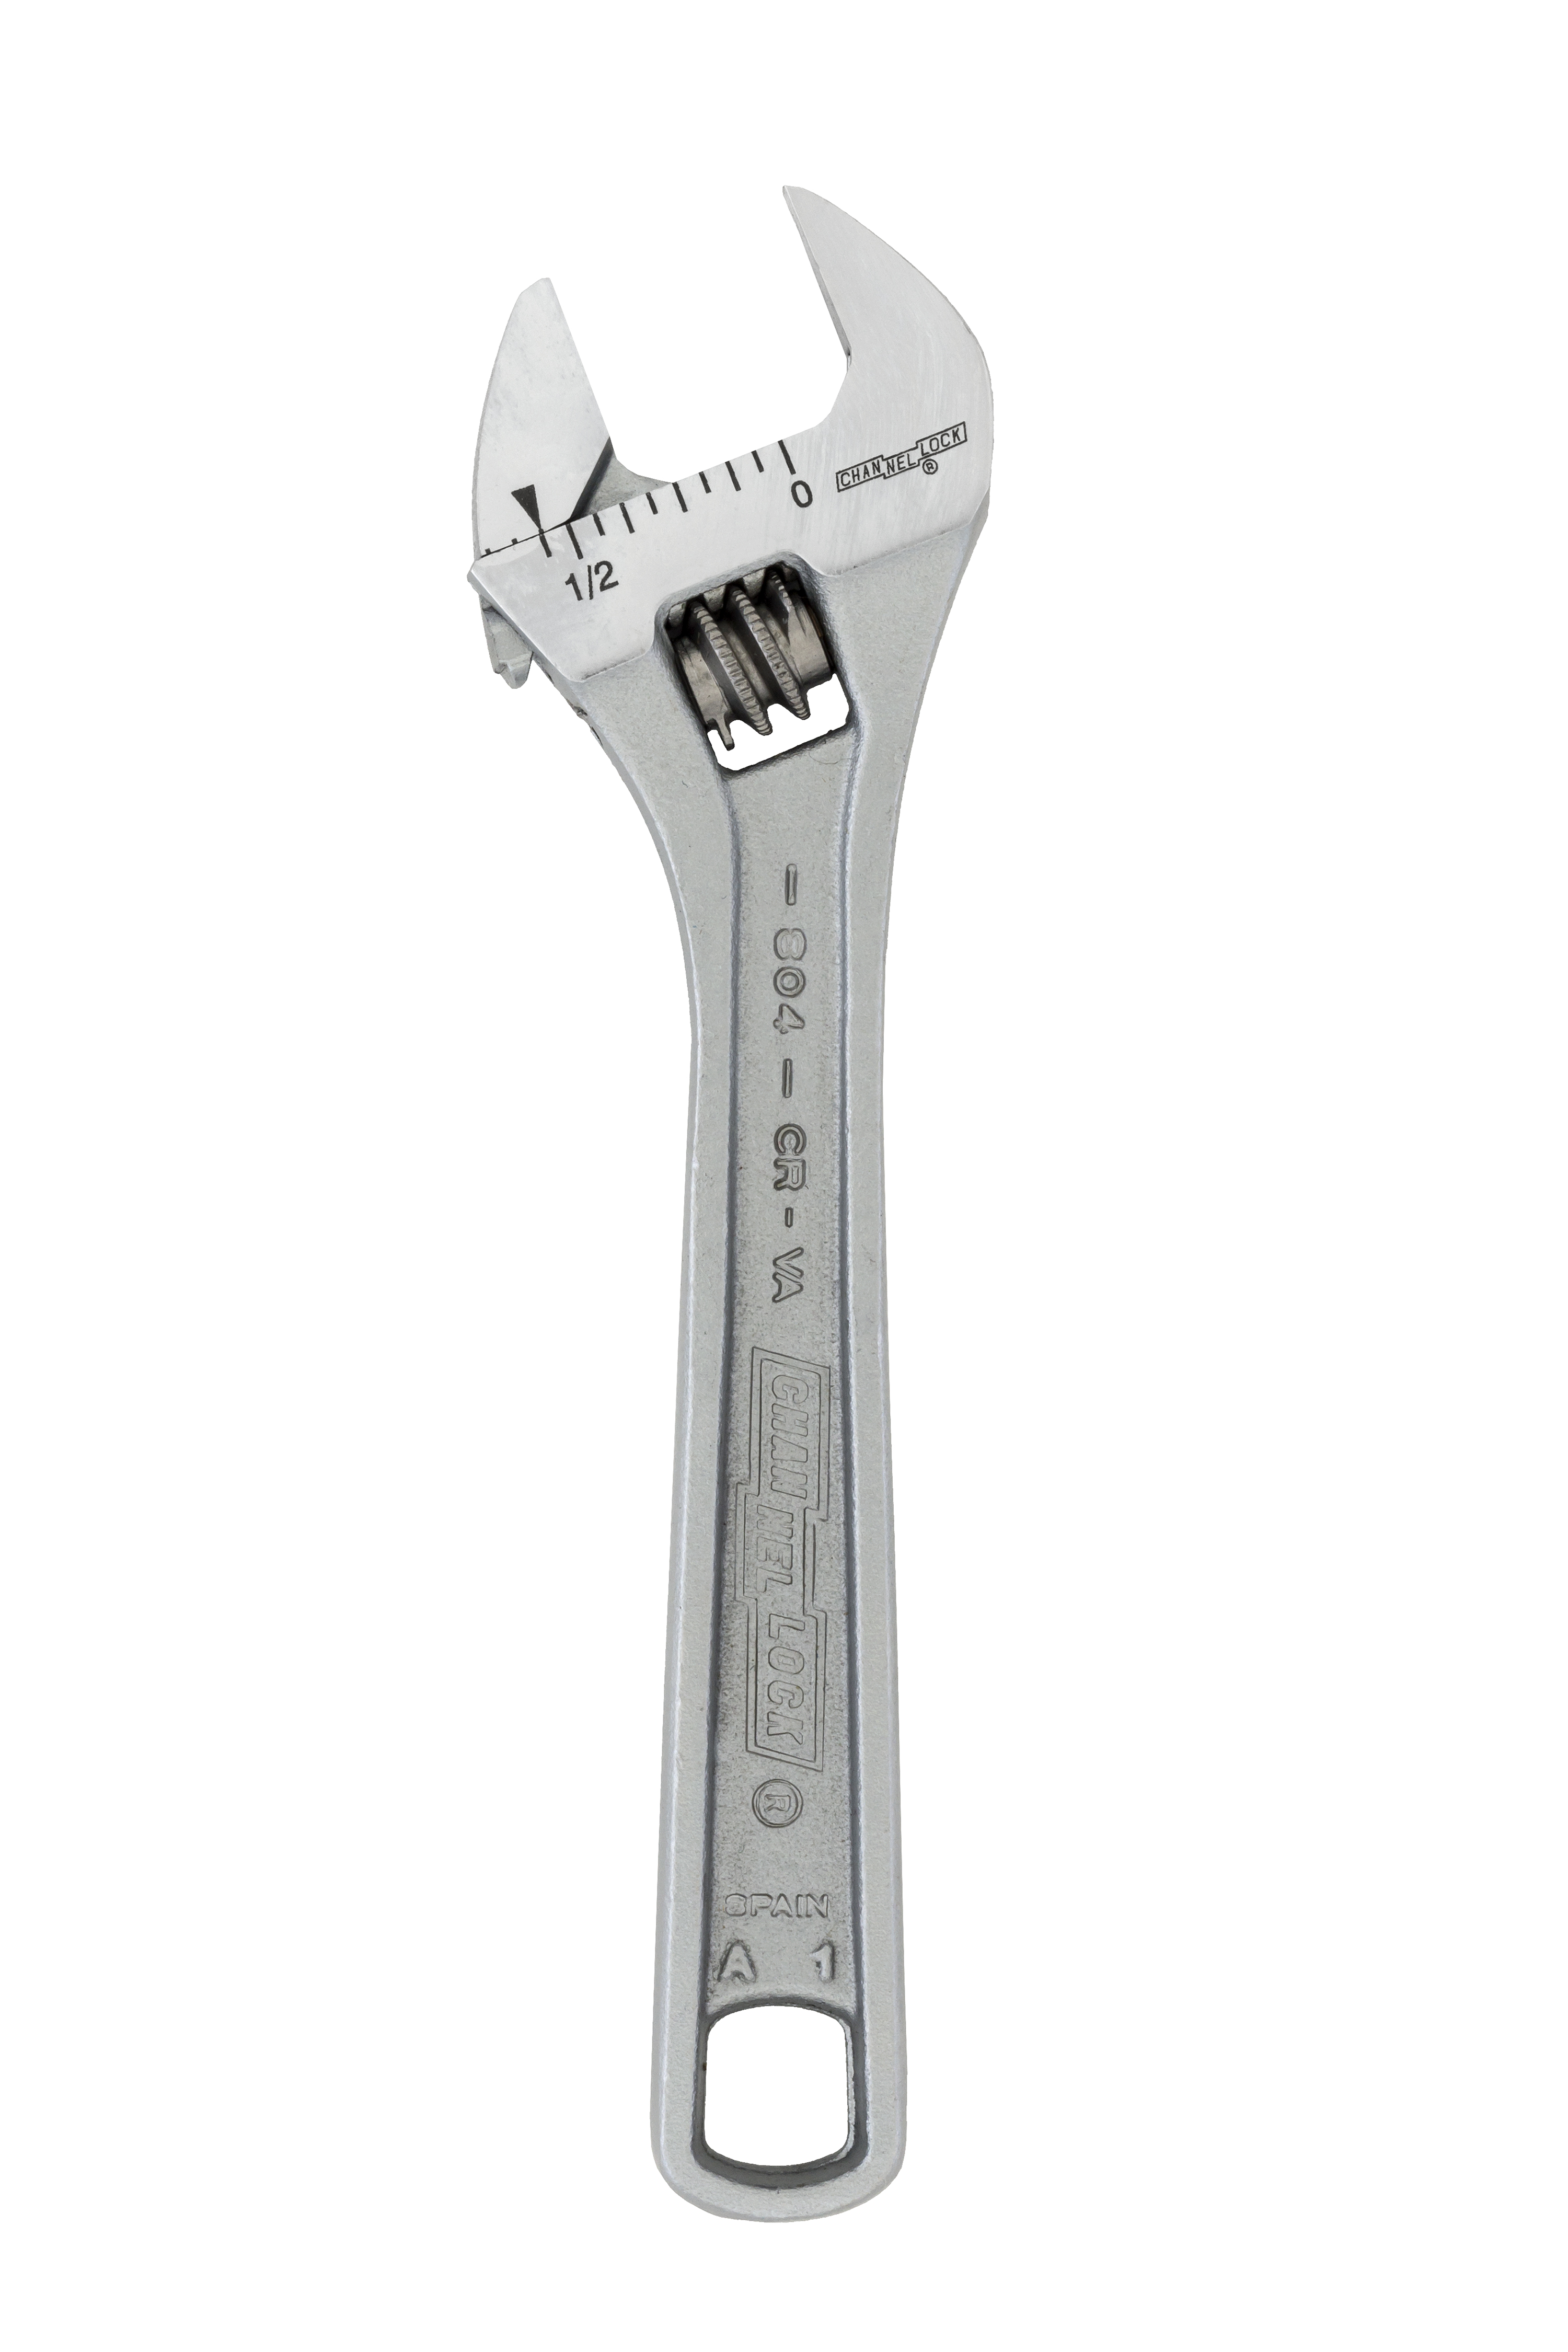 4" Chrome Adjustable Wrench